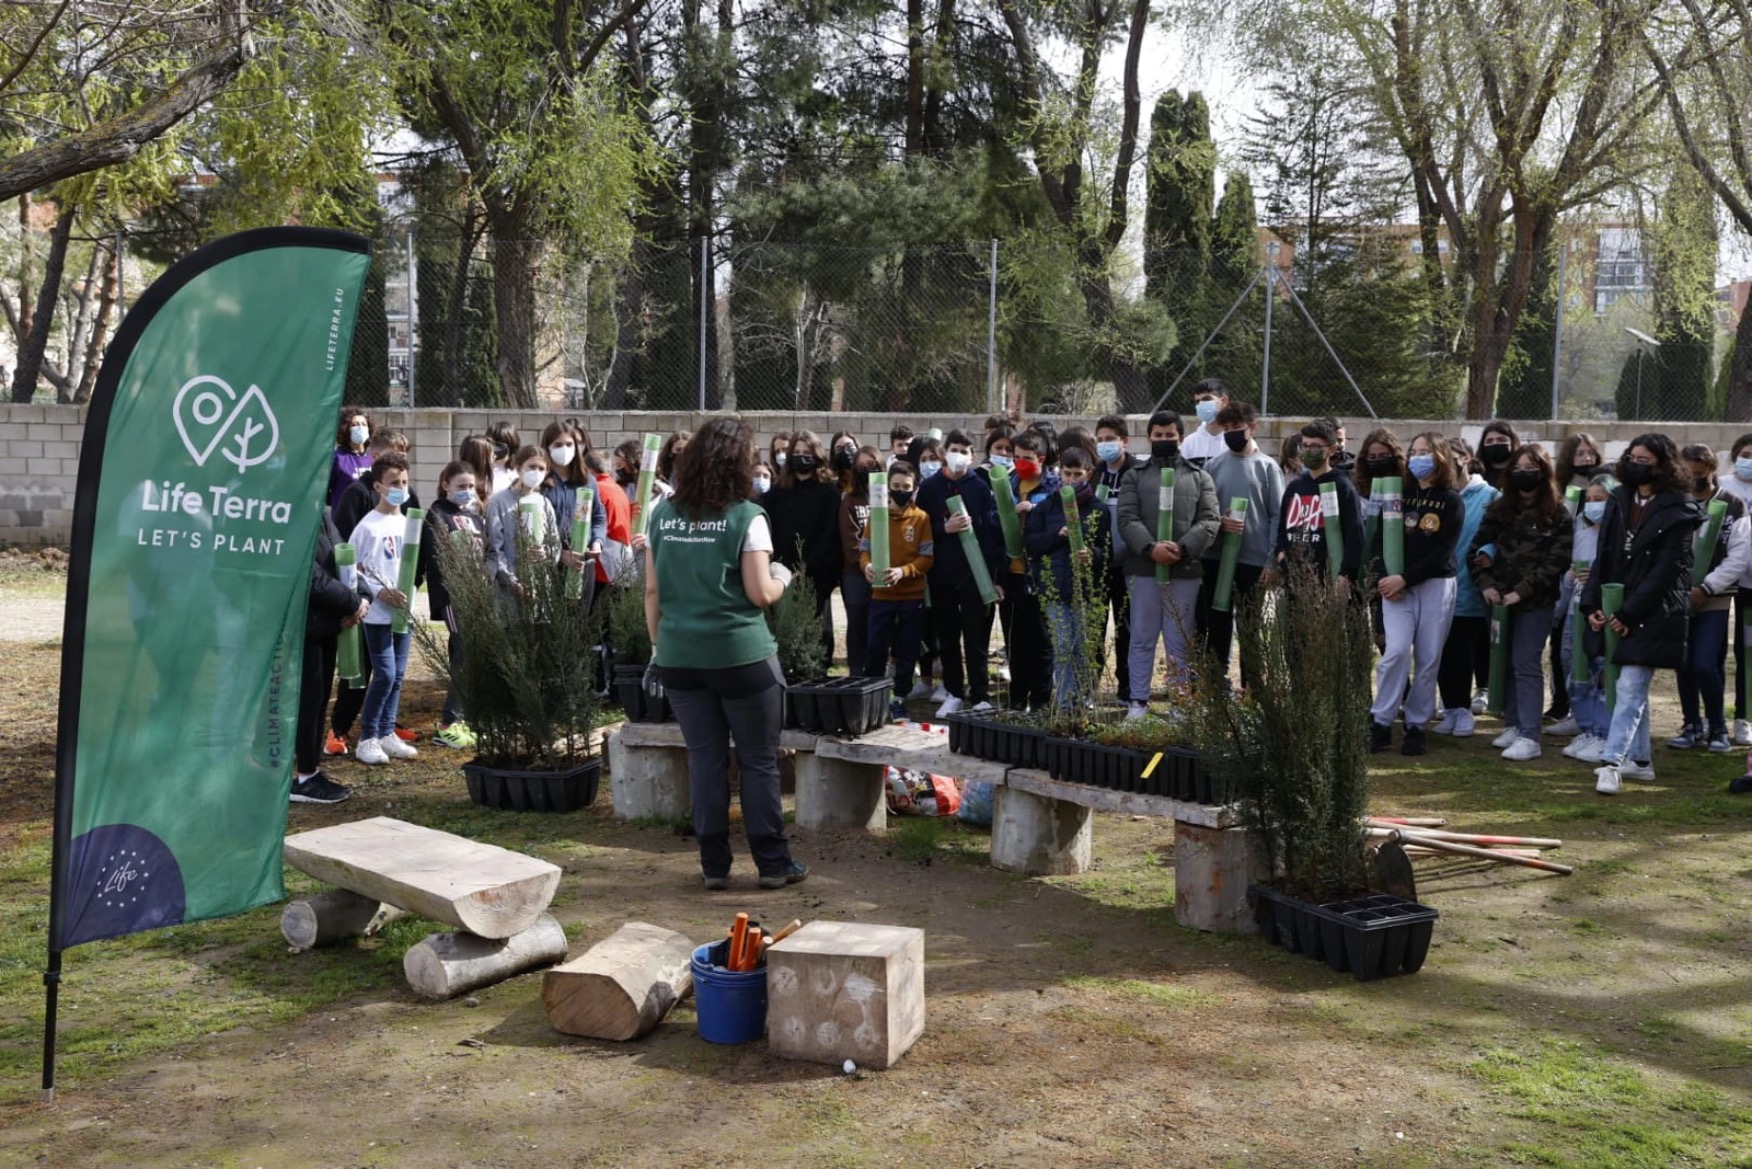 On Monday 28 March, the Life Terra team carried out a planting event in the schoolyard of the high school IES Alonso Quijano with the collaboration of 